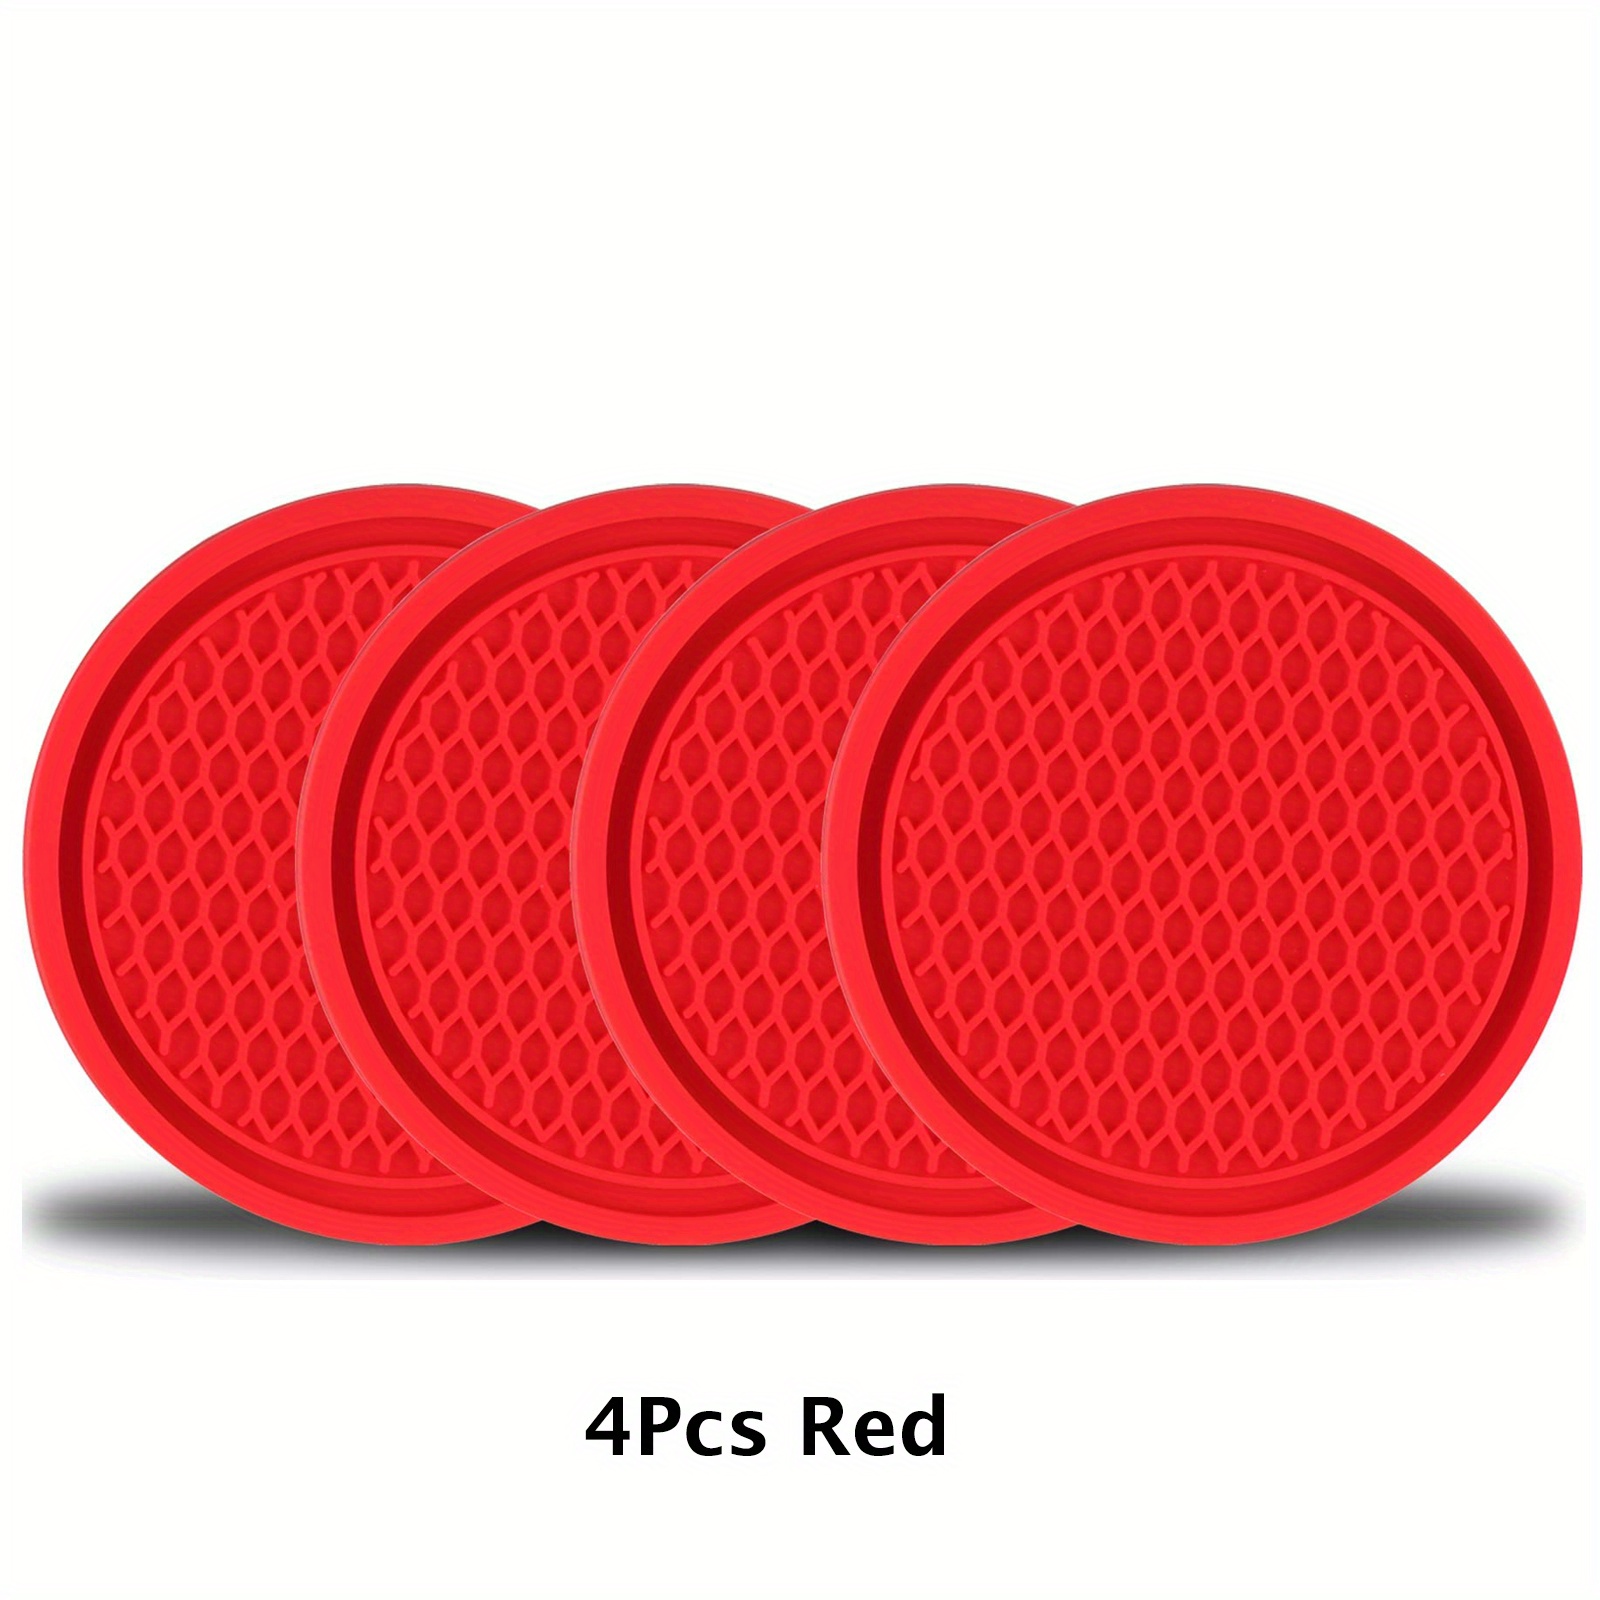 4PCS Red Soft Silicone Inner Car Cup Holder Coaster Ornaments Universal Fit  2.7